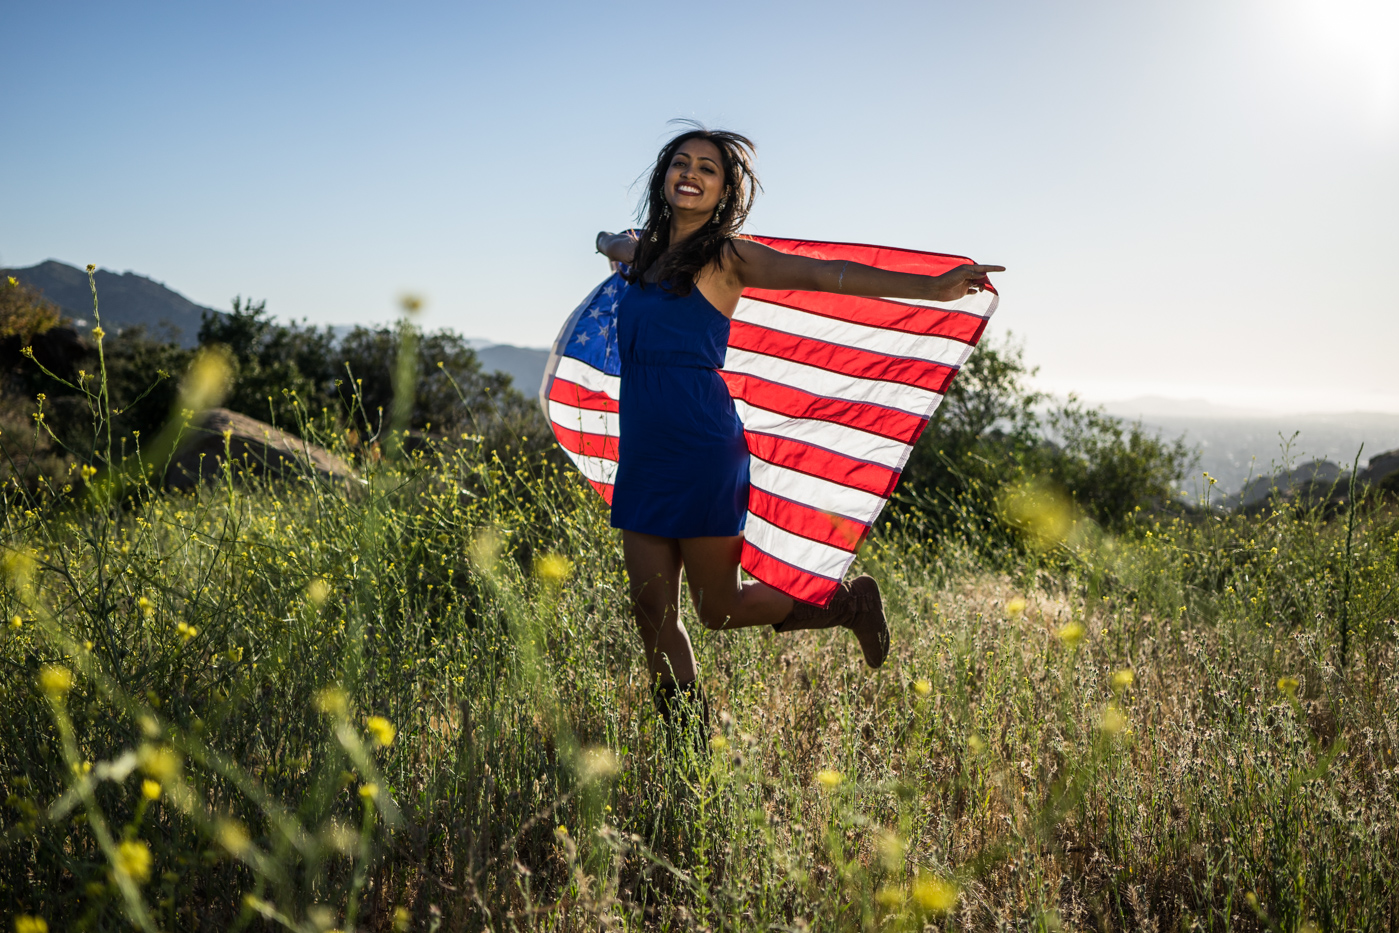 American woman jumping with flag portrait in grassy meadow landscape at sunset